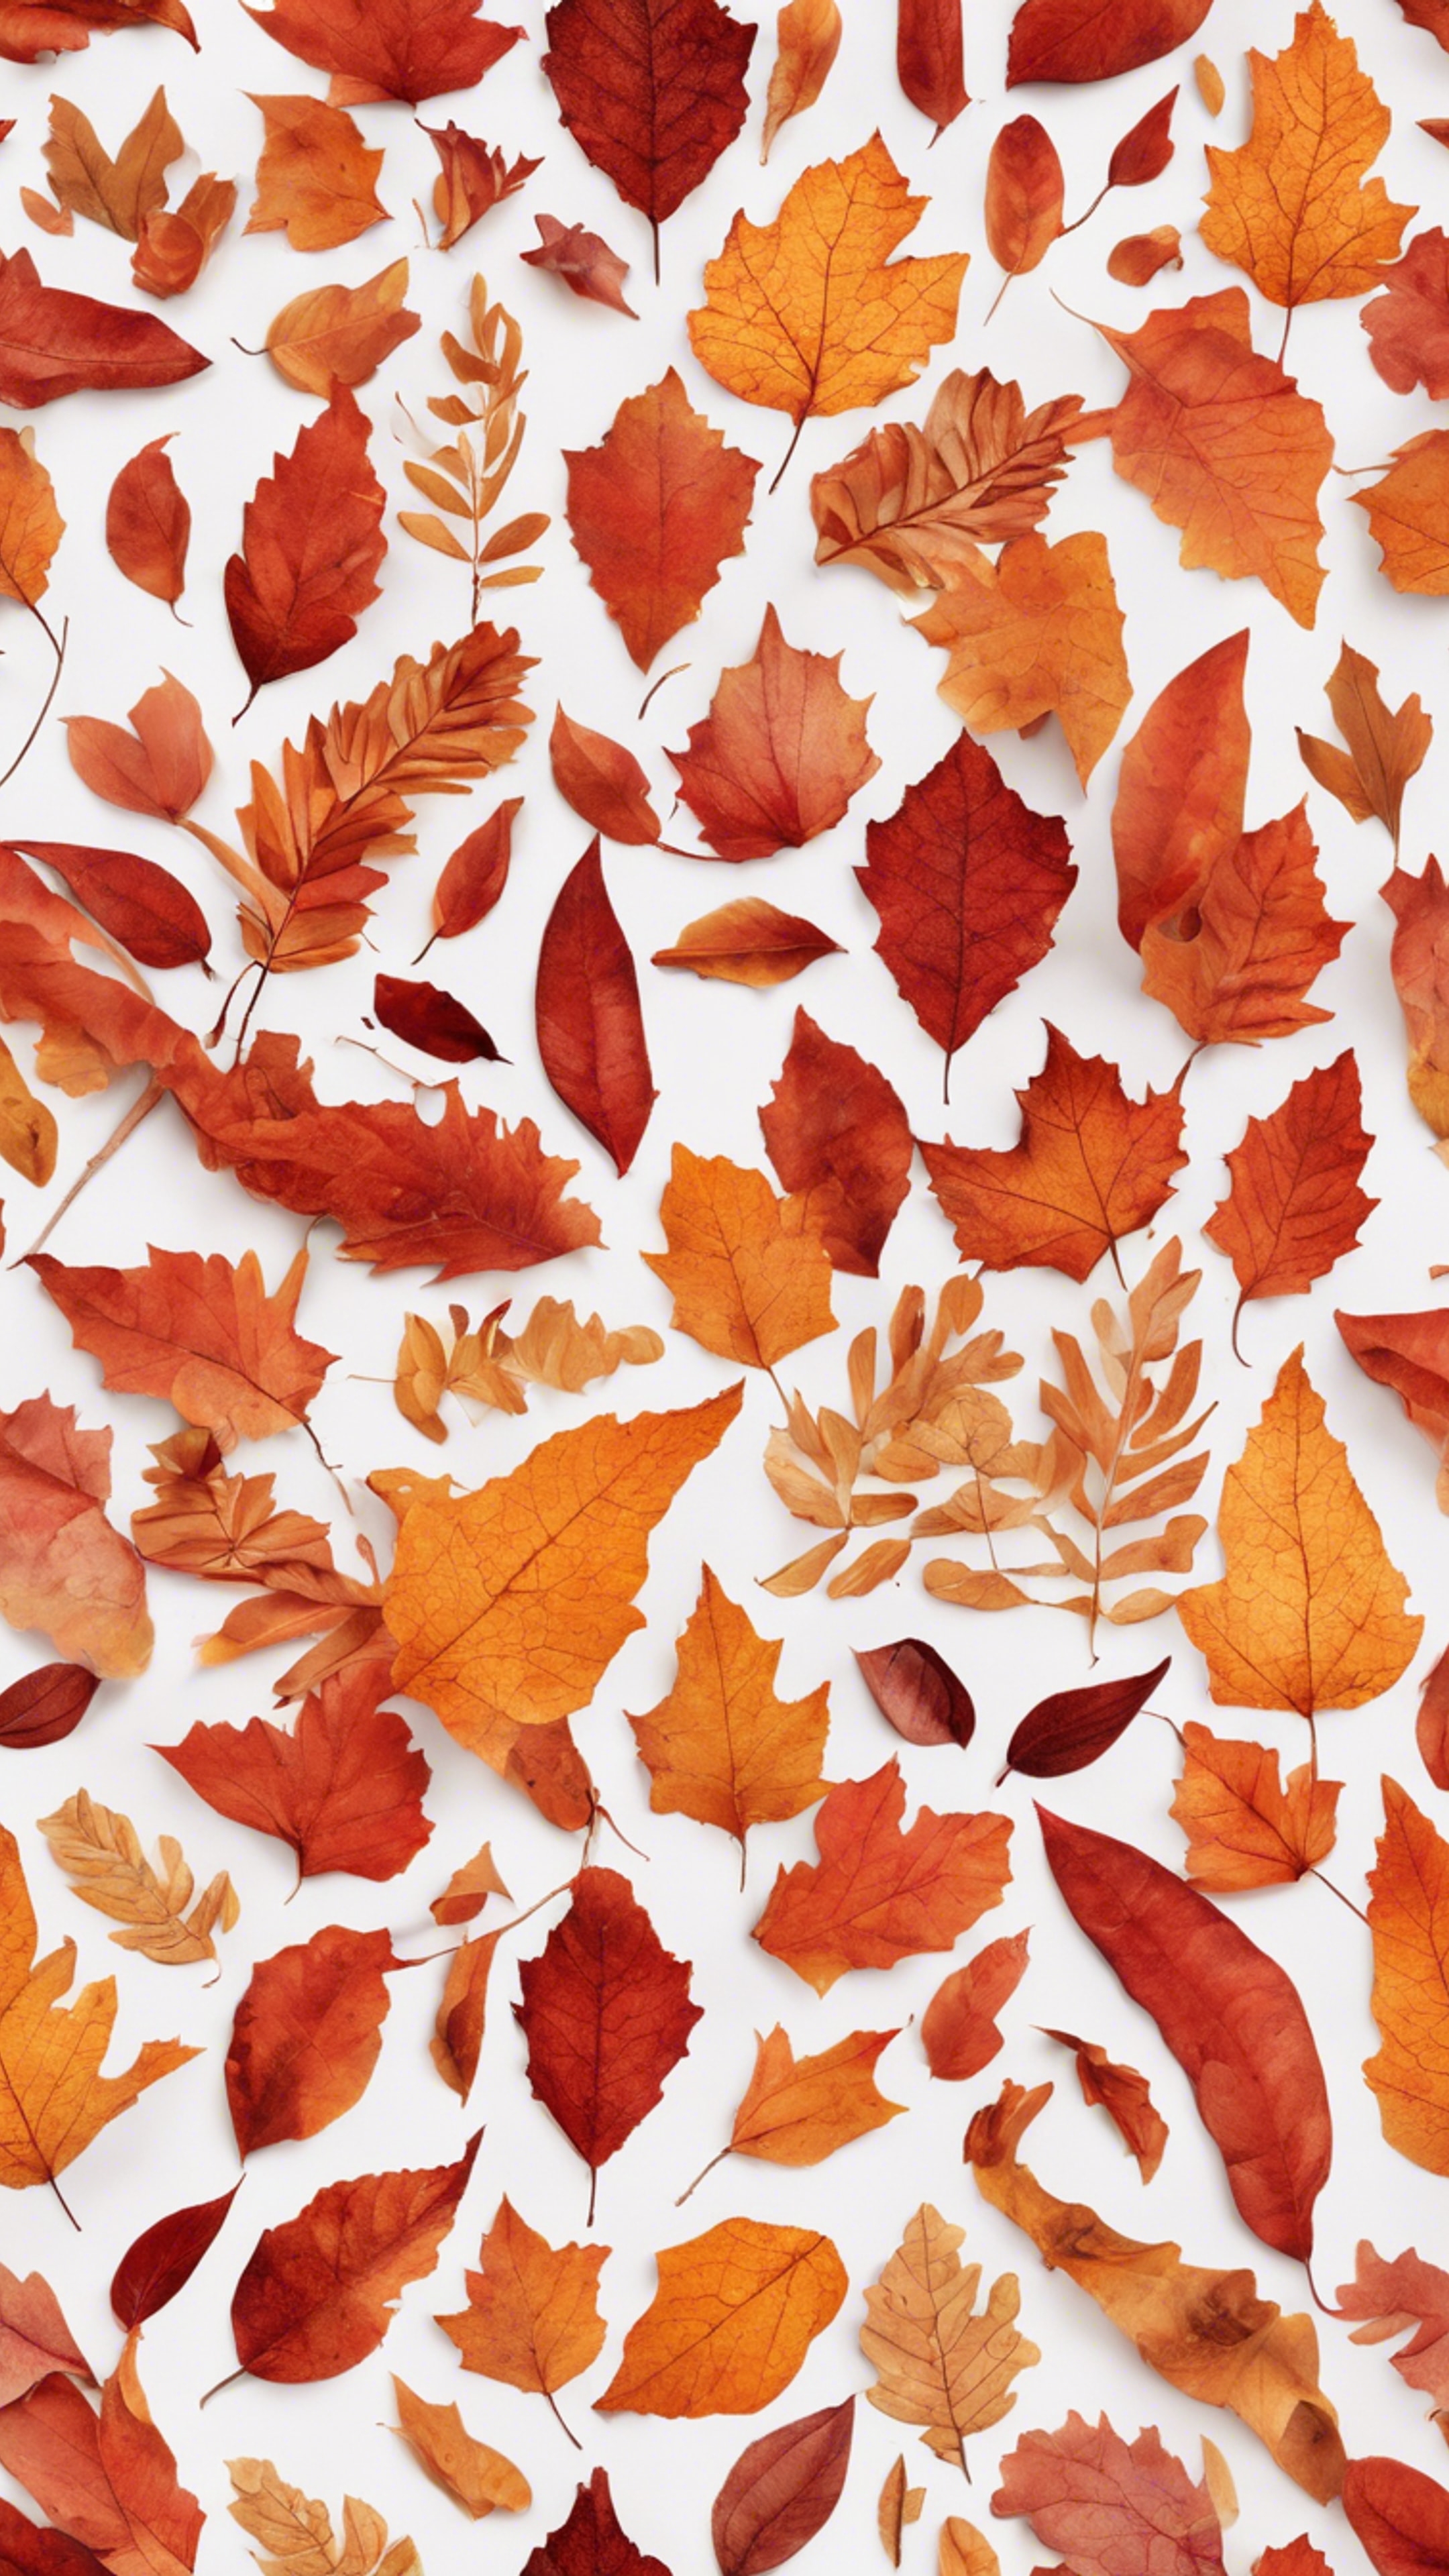 A fiery autumn pattern, reminiscent of falling leaves, in a seamless mix of red and orange. Tapeta[40781a28d8554bd2886e]